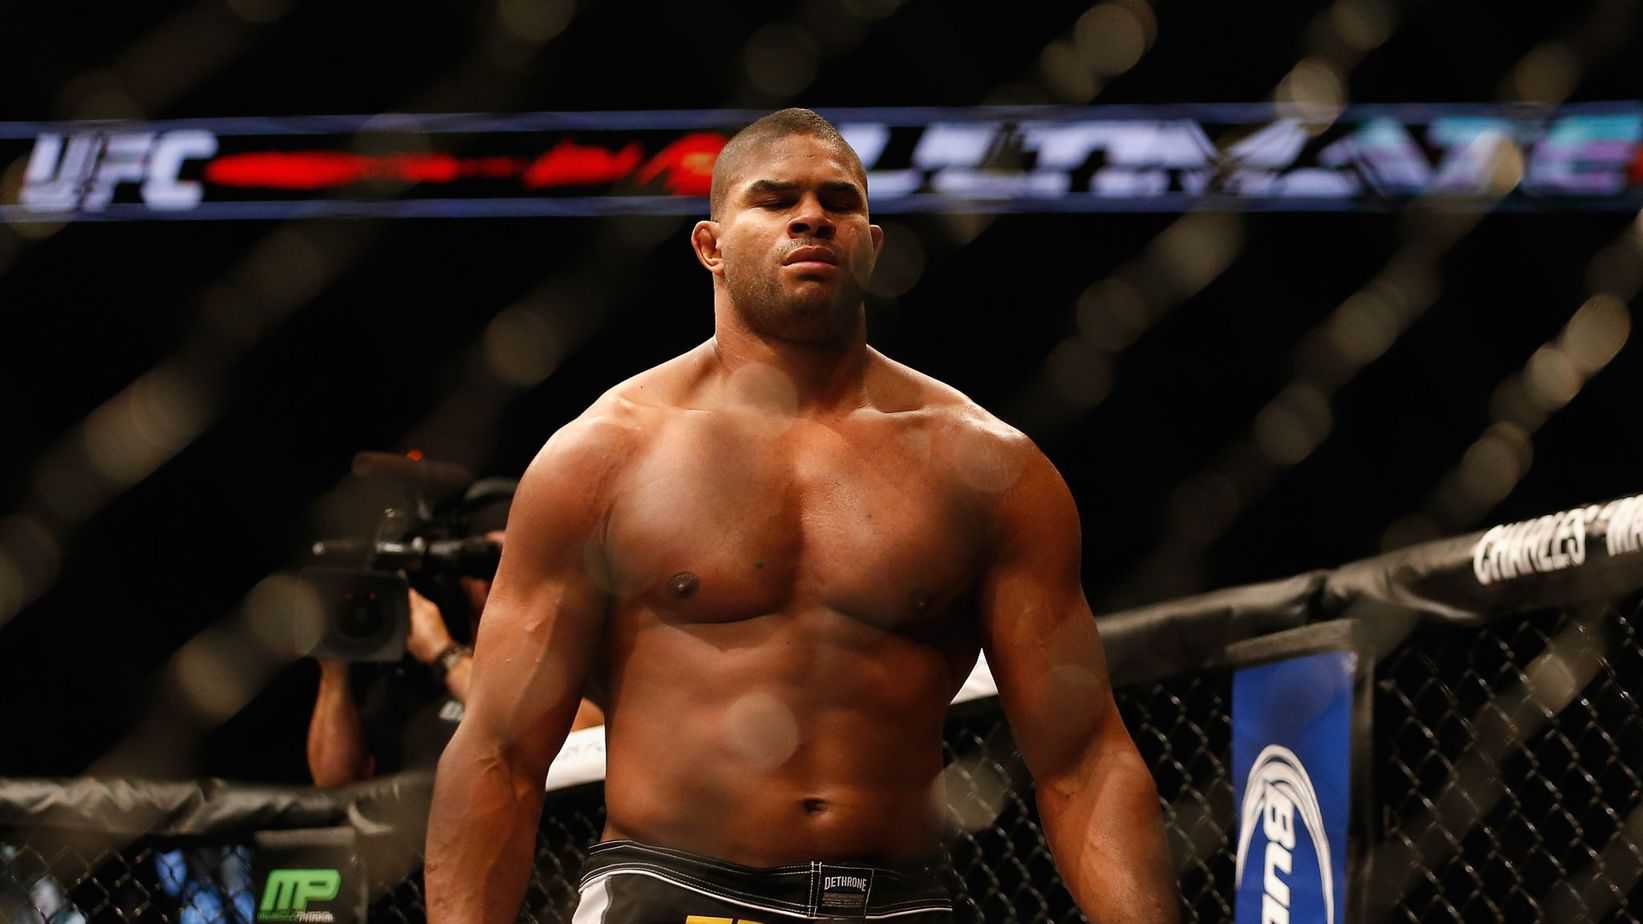 UFC DFS Picks and Data for UFC Vegas 18: Overeem vs Volkov DraftKings and FanDuel expert projections